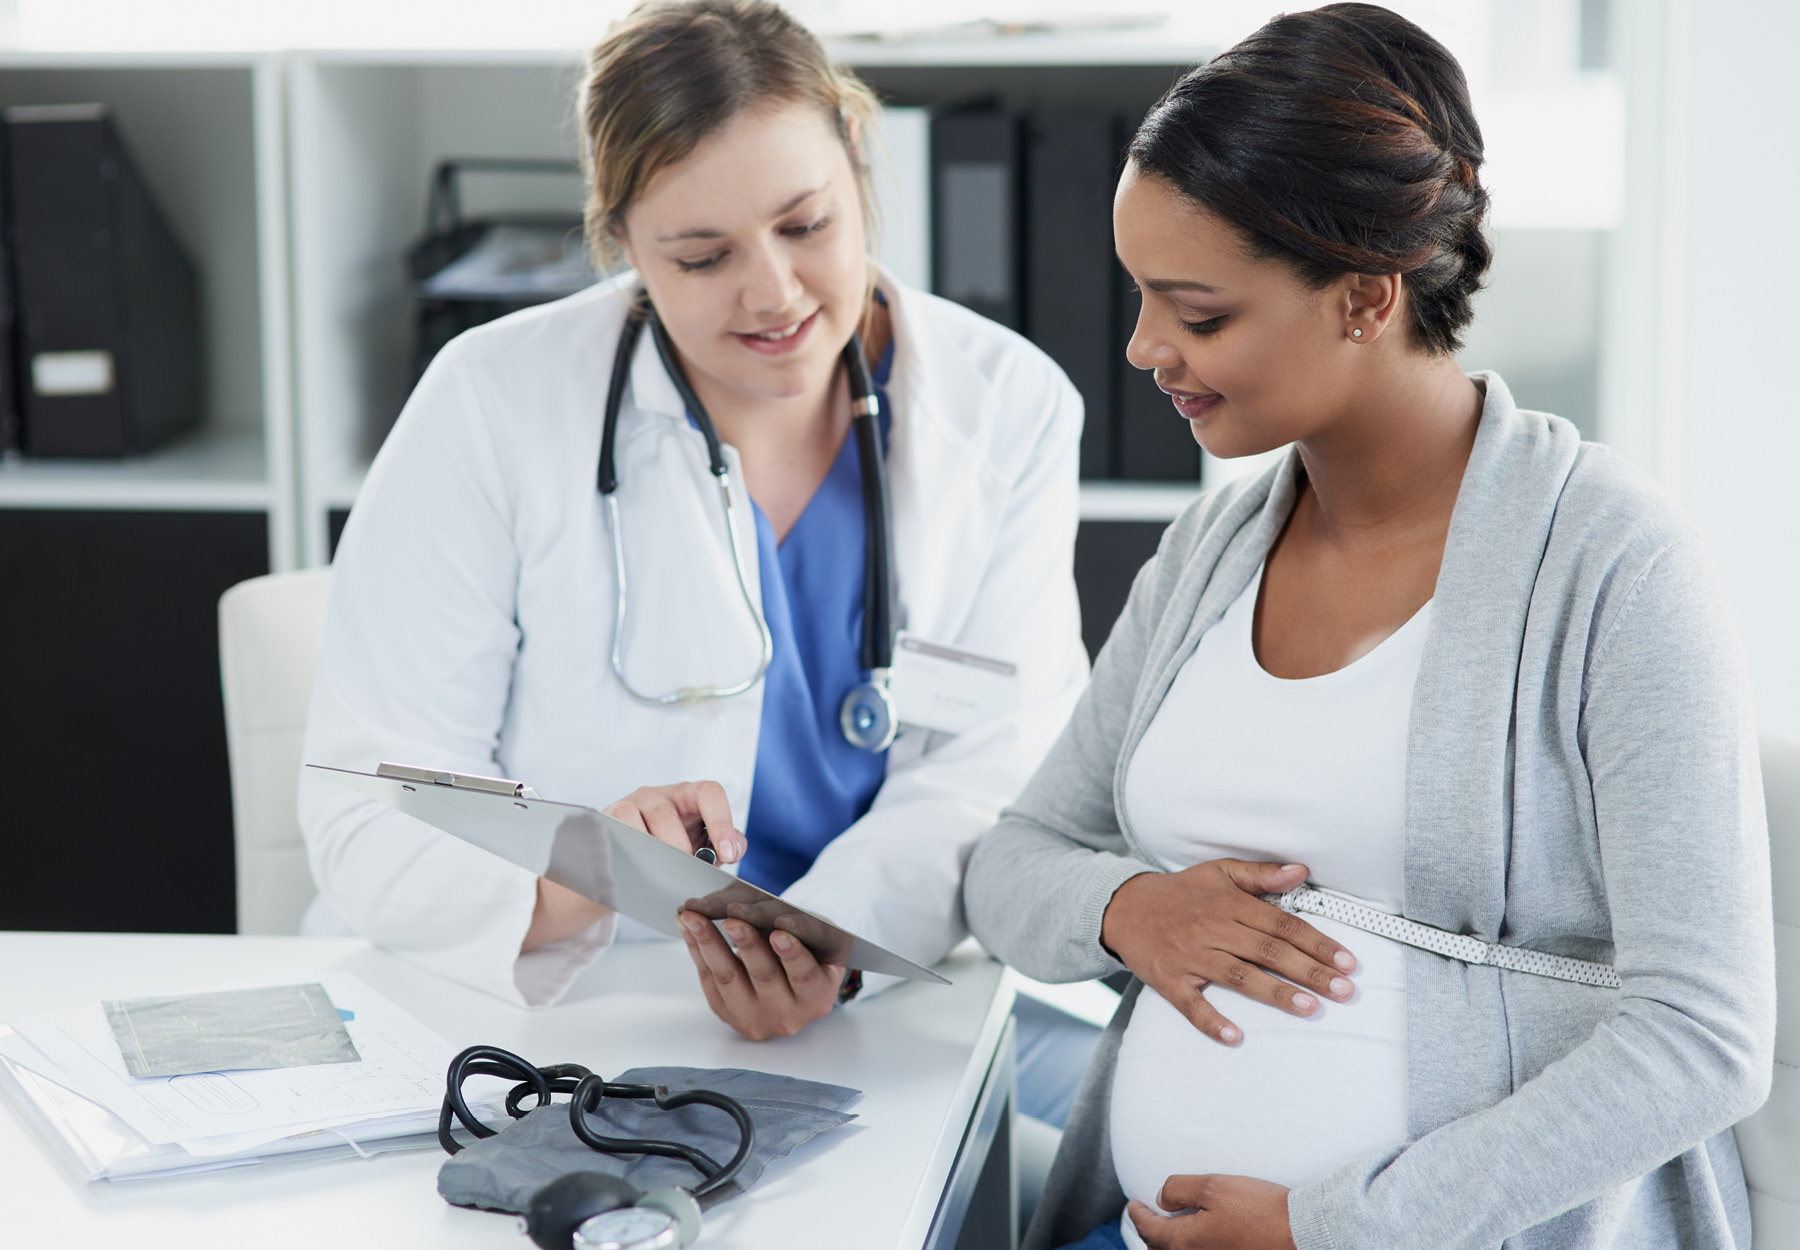 Pregnant woman meeting with her doctor. Stock image.